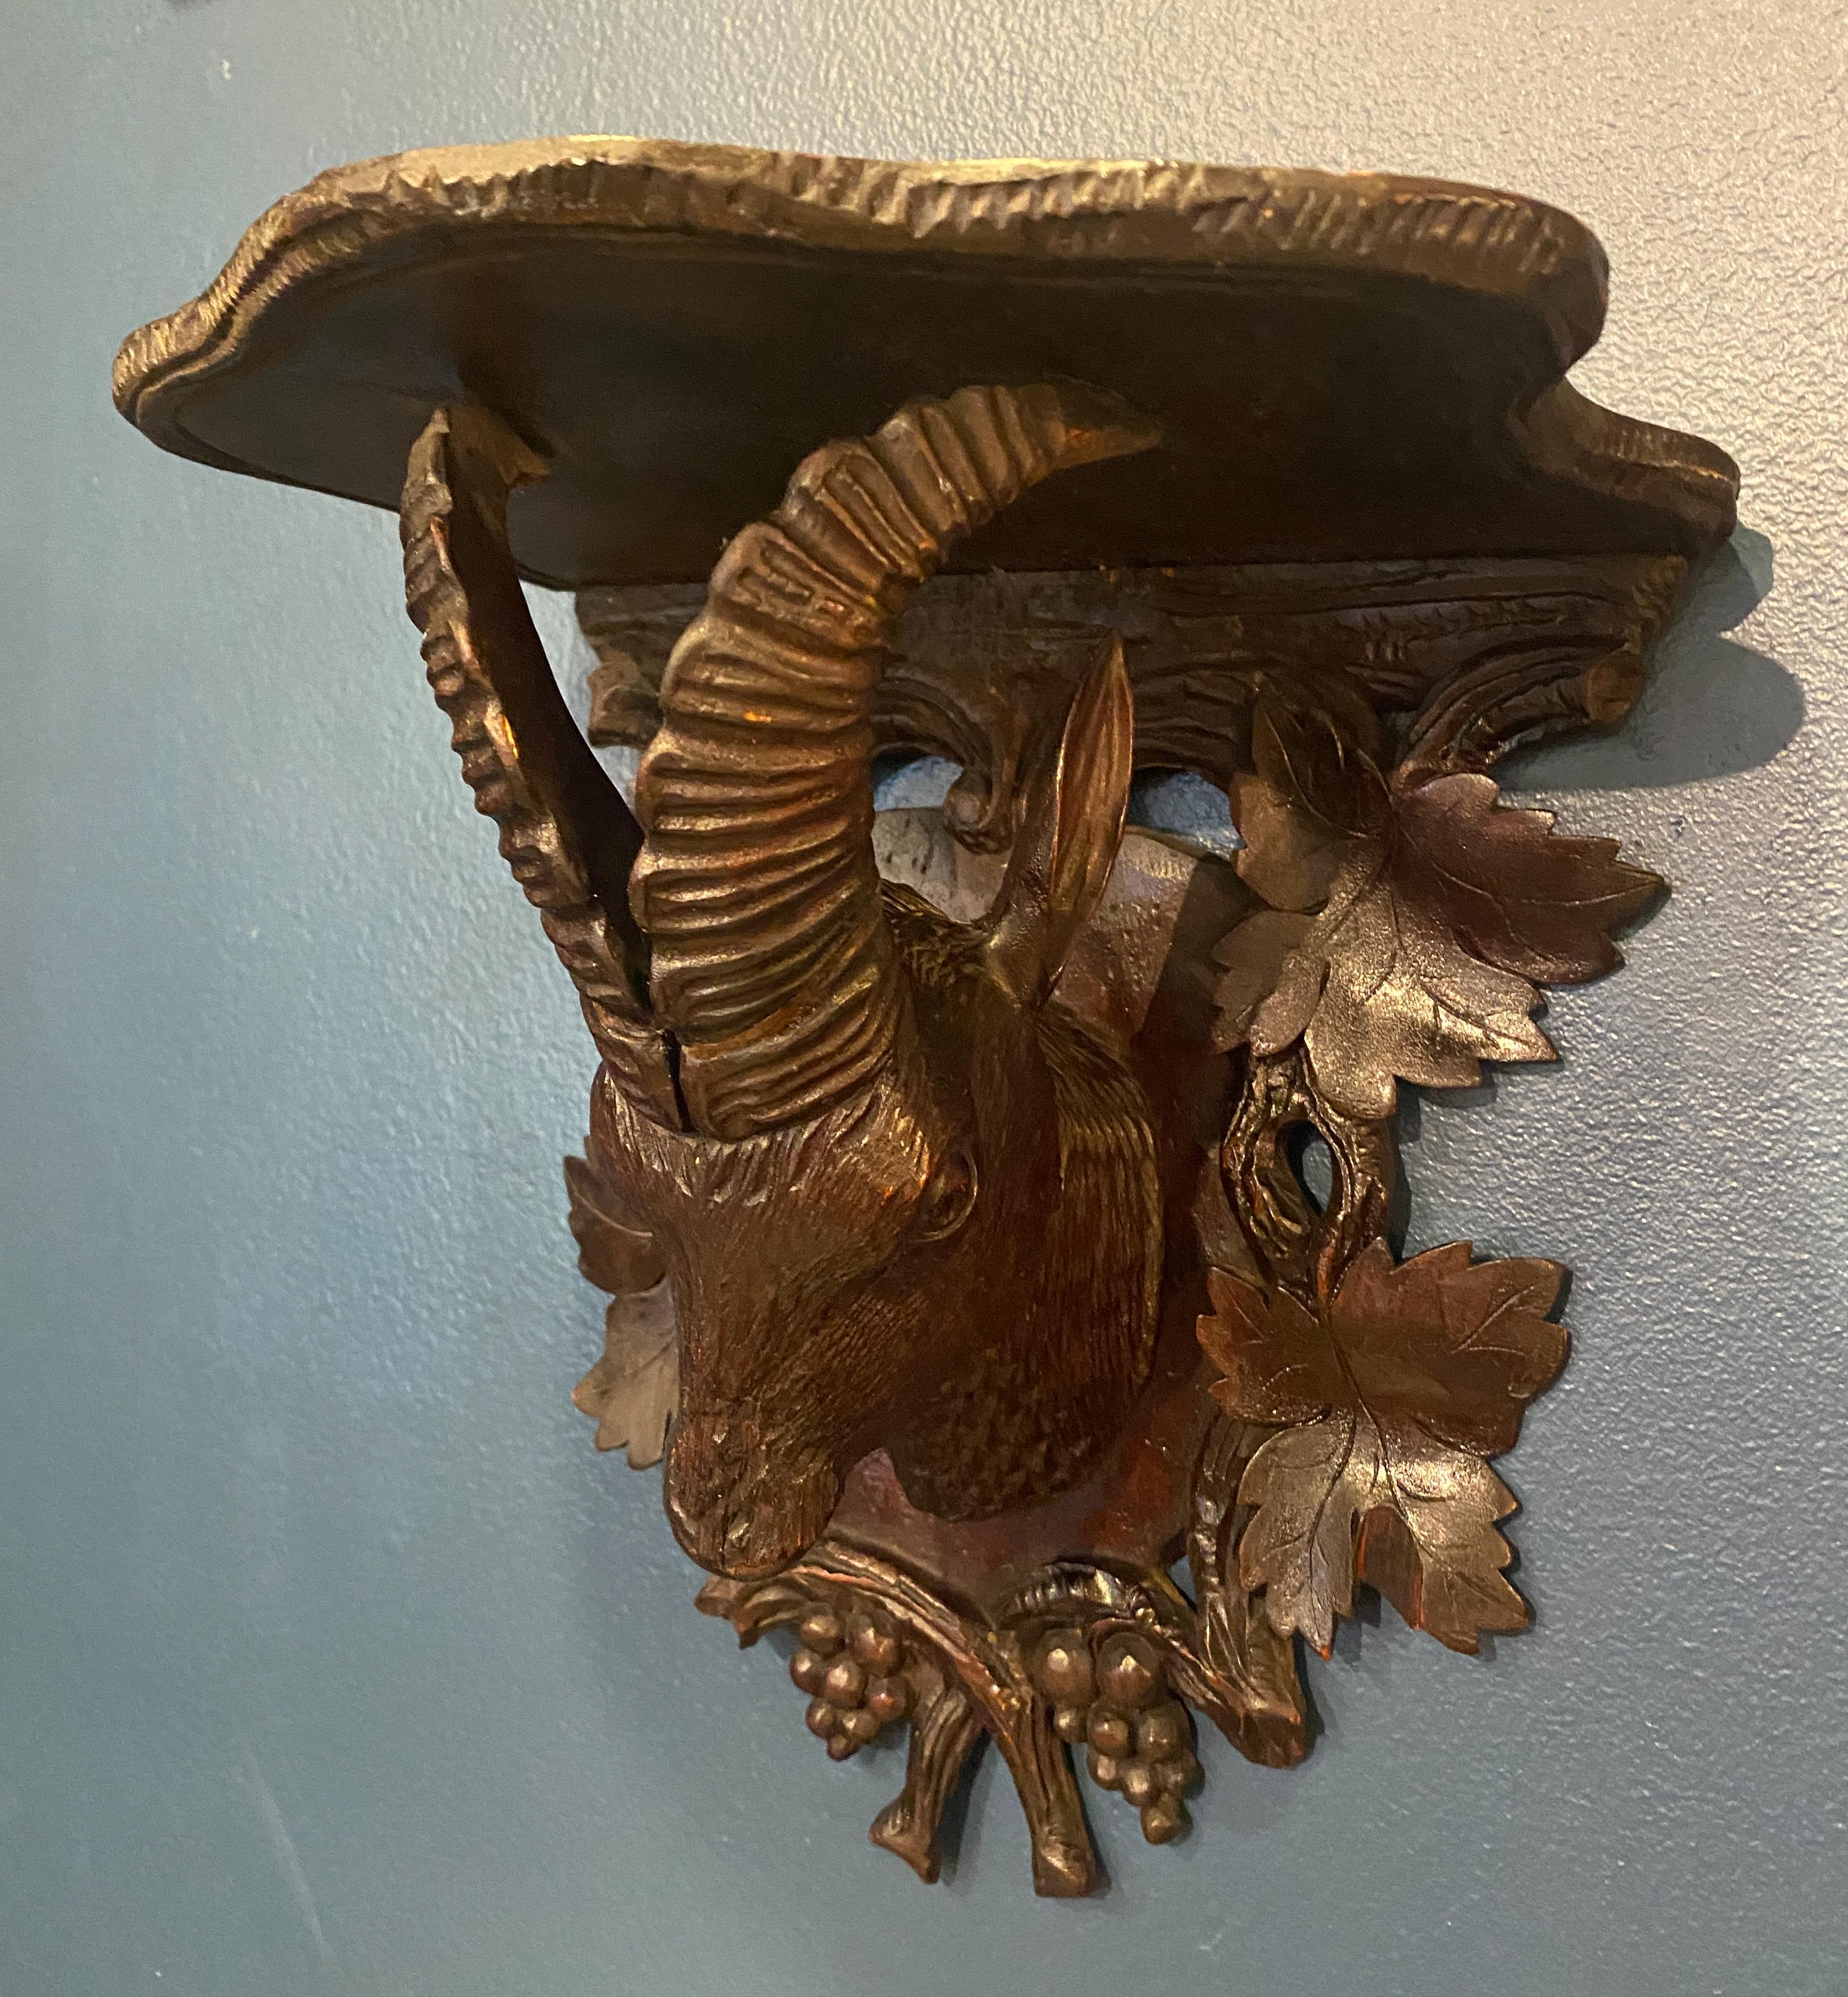 Late 19th century Black Forest ram head with leaf motif wood shelf
Switzerland, circa 1870s 
Good Condition. Hand carved.
Measures: 9.5” H, 9” W, 9.5